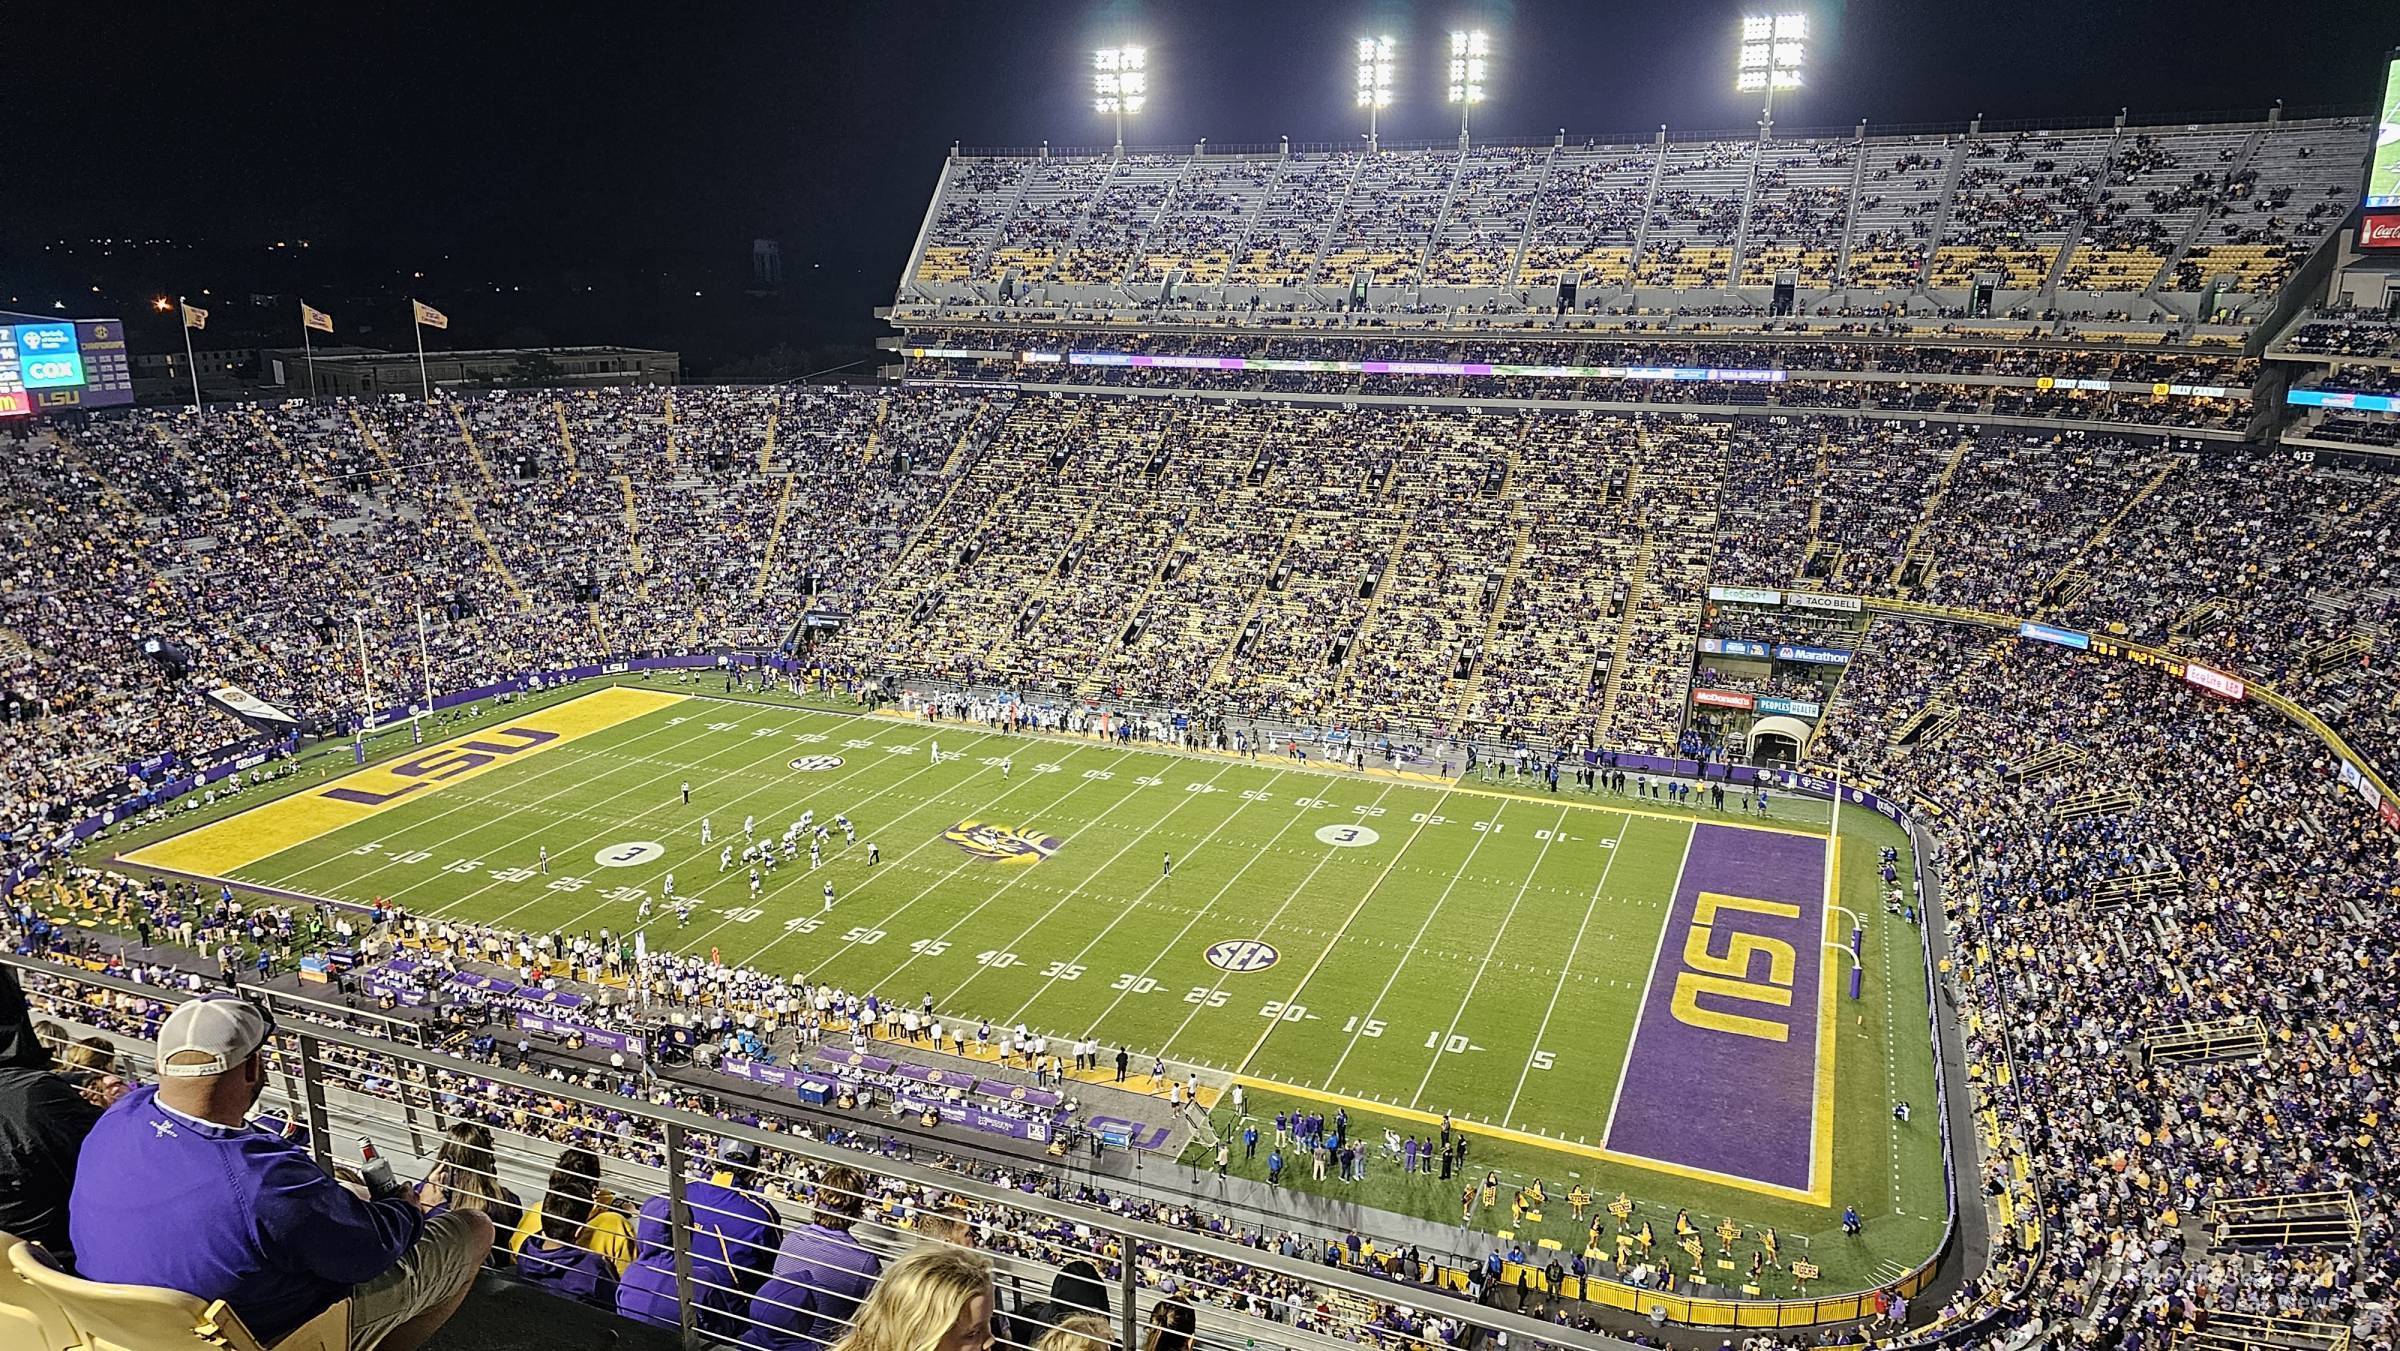 section 612, row 1 seat view  - tiger stadium